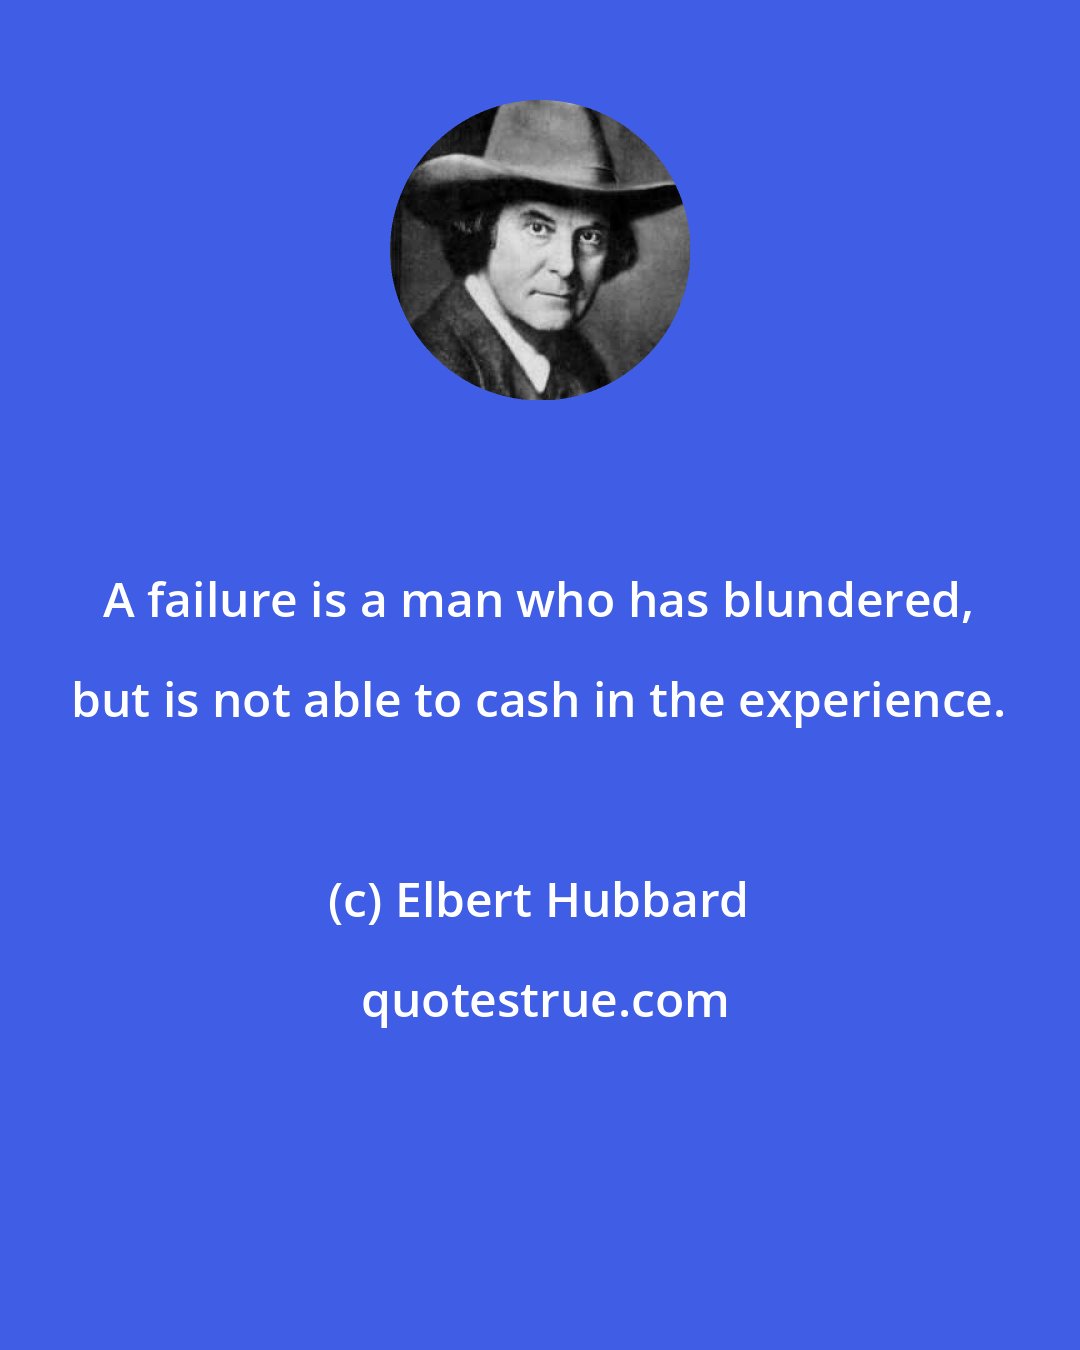 Elbert Hubbard: A failure is a man who has blundered, but is not able to cash in the experience.